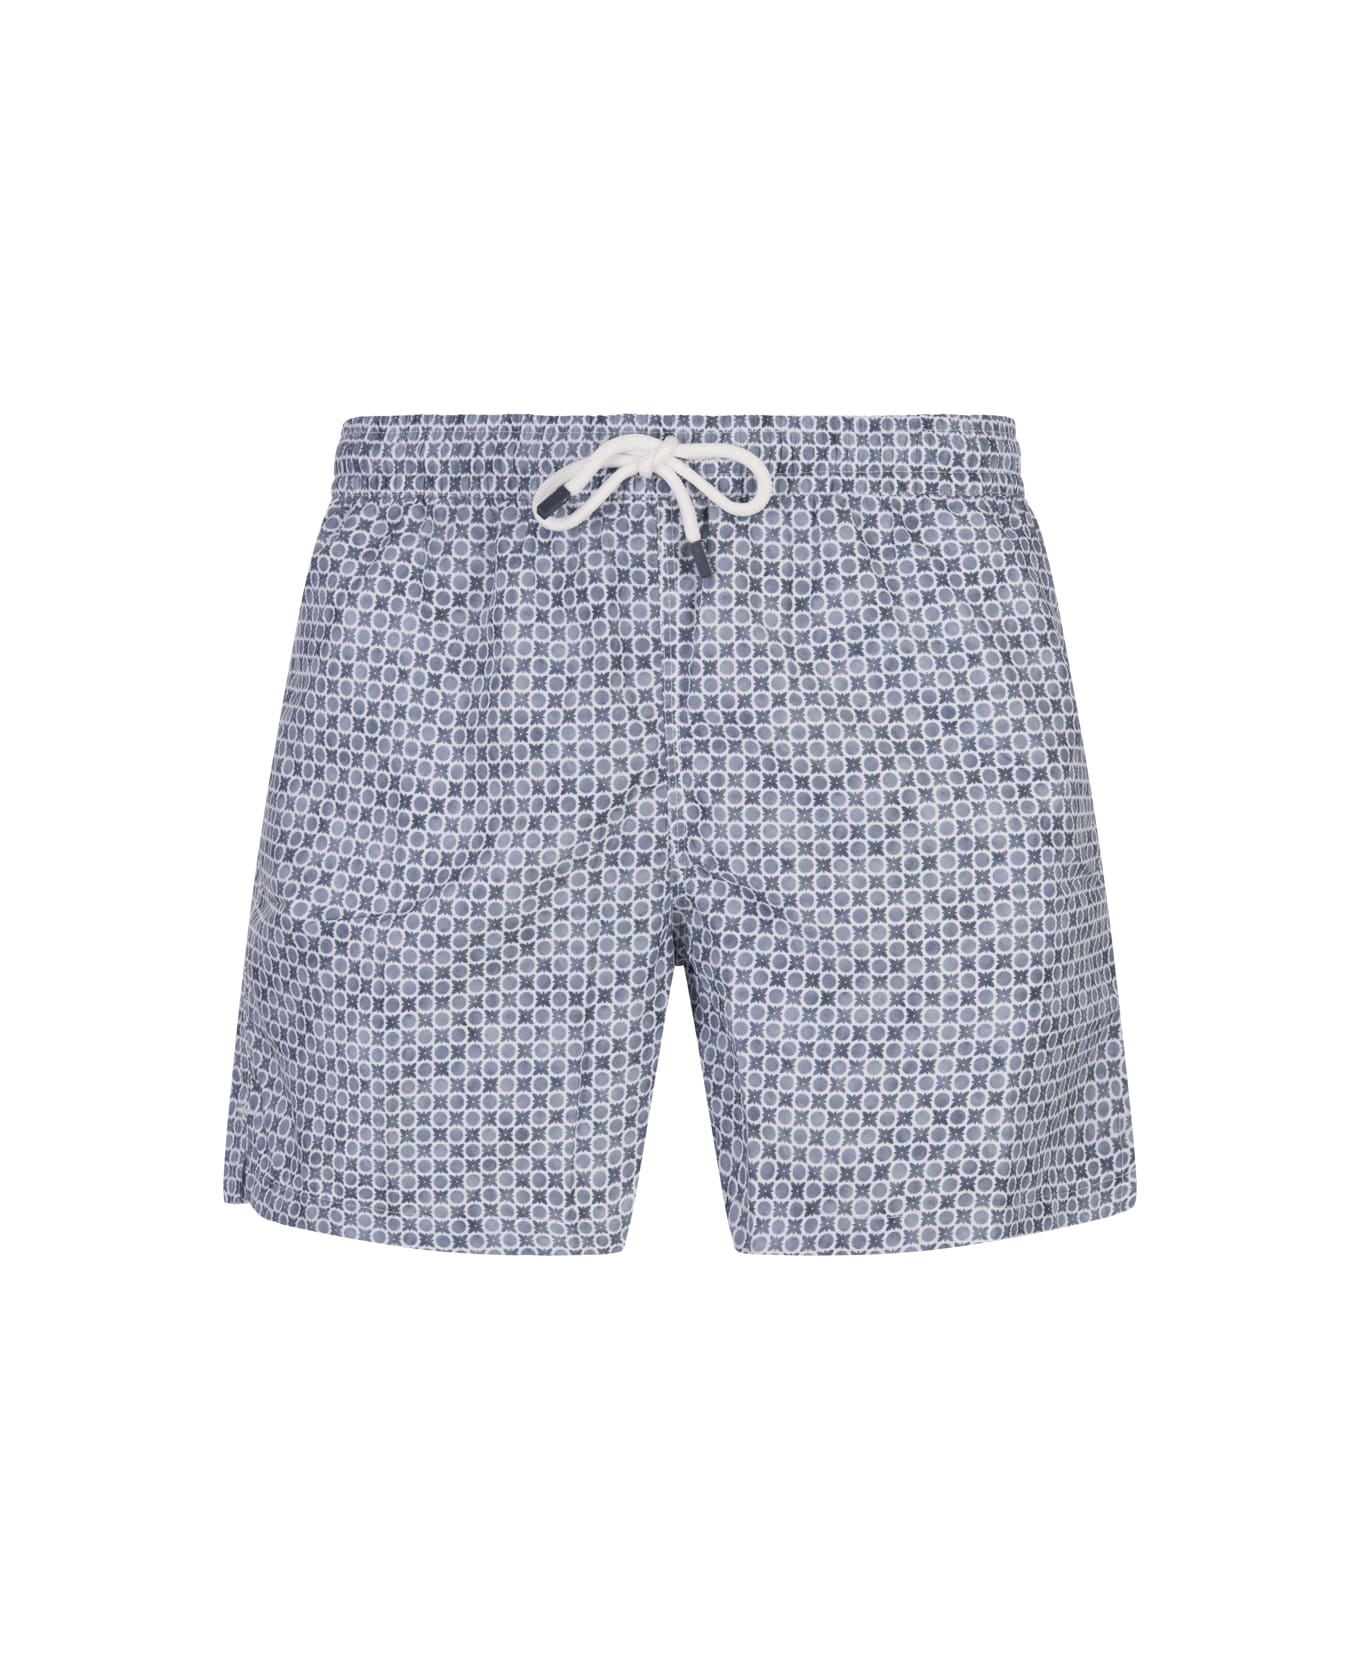 Fedeli Swim Shorts With Micro Pattern Of Polka Dots And Flowers - Blue